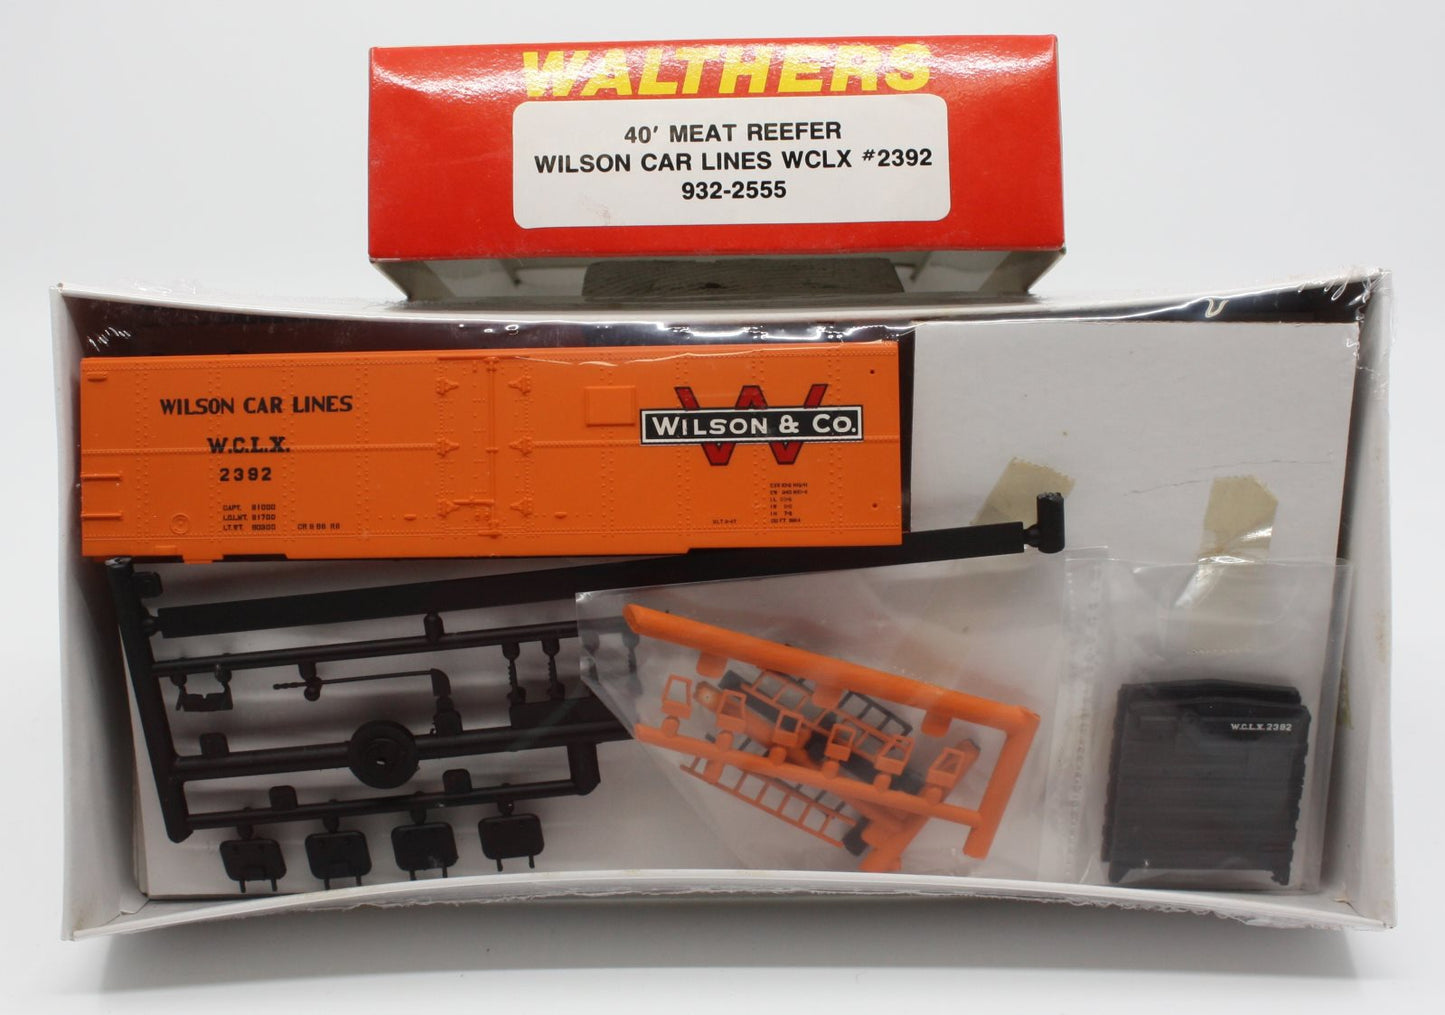 Walthers 932-2555 HO Wilson Car Lines WCLX 40' Meat Reefer #2392 Kit